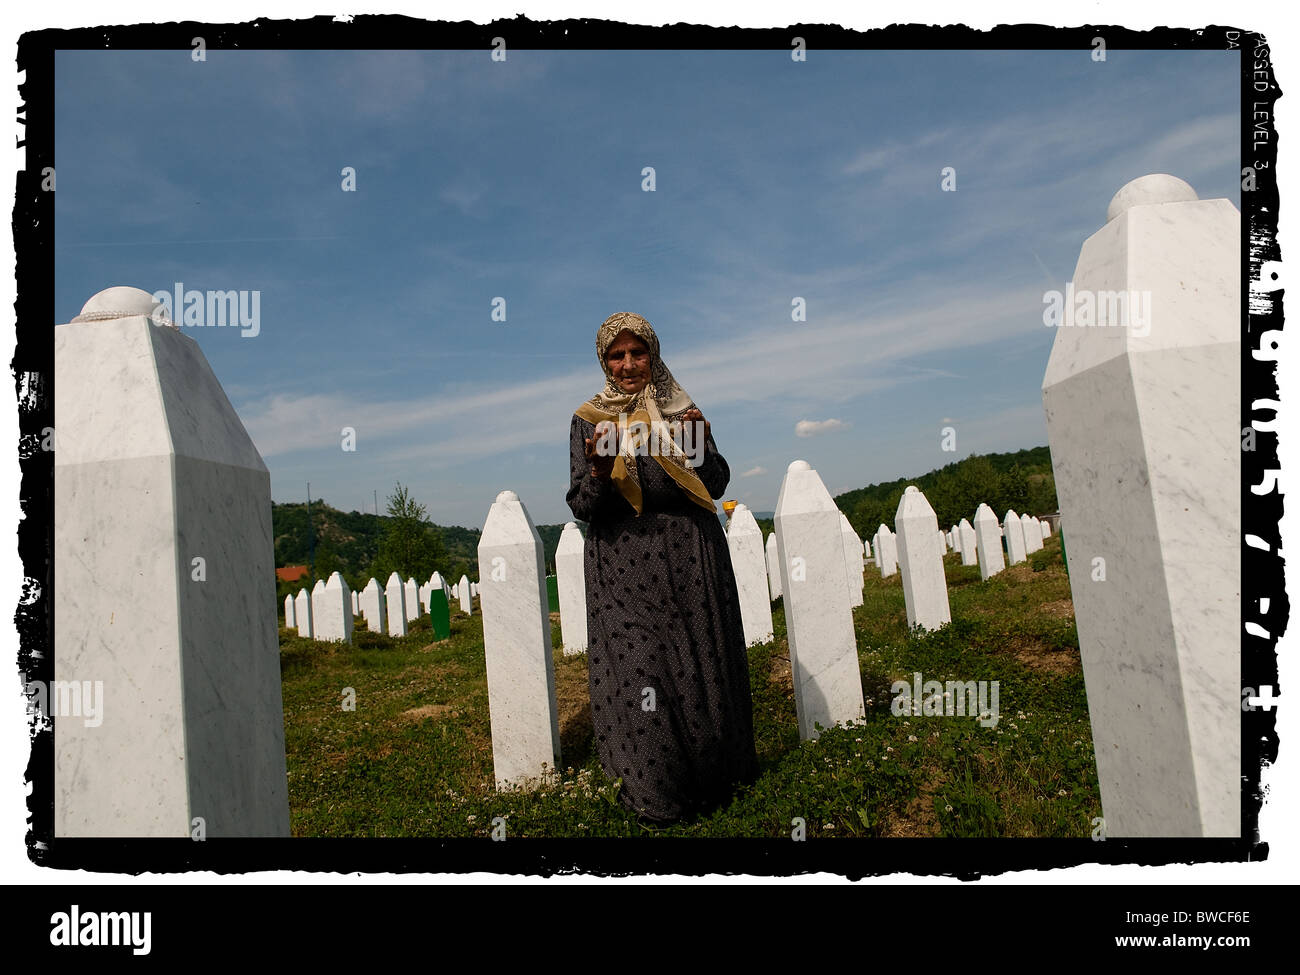 A Bosnian Muslim woman prays between graves of her relatives, all victims of the Srebrenica genocide, at the cemetery in Potocari near Srebrenica, Bosnia and Hercegovina. More than 8,000 Bosnian Muslim men and boys were killed after the Bosnian Serb Army attacked Srebrenica, a designated UN safe area, on 10-11 July 1995, despite the presence of UN peacekeepers. Stock Photo